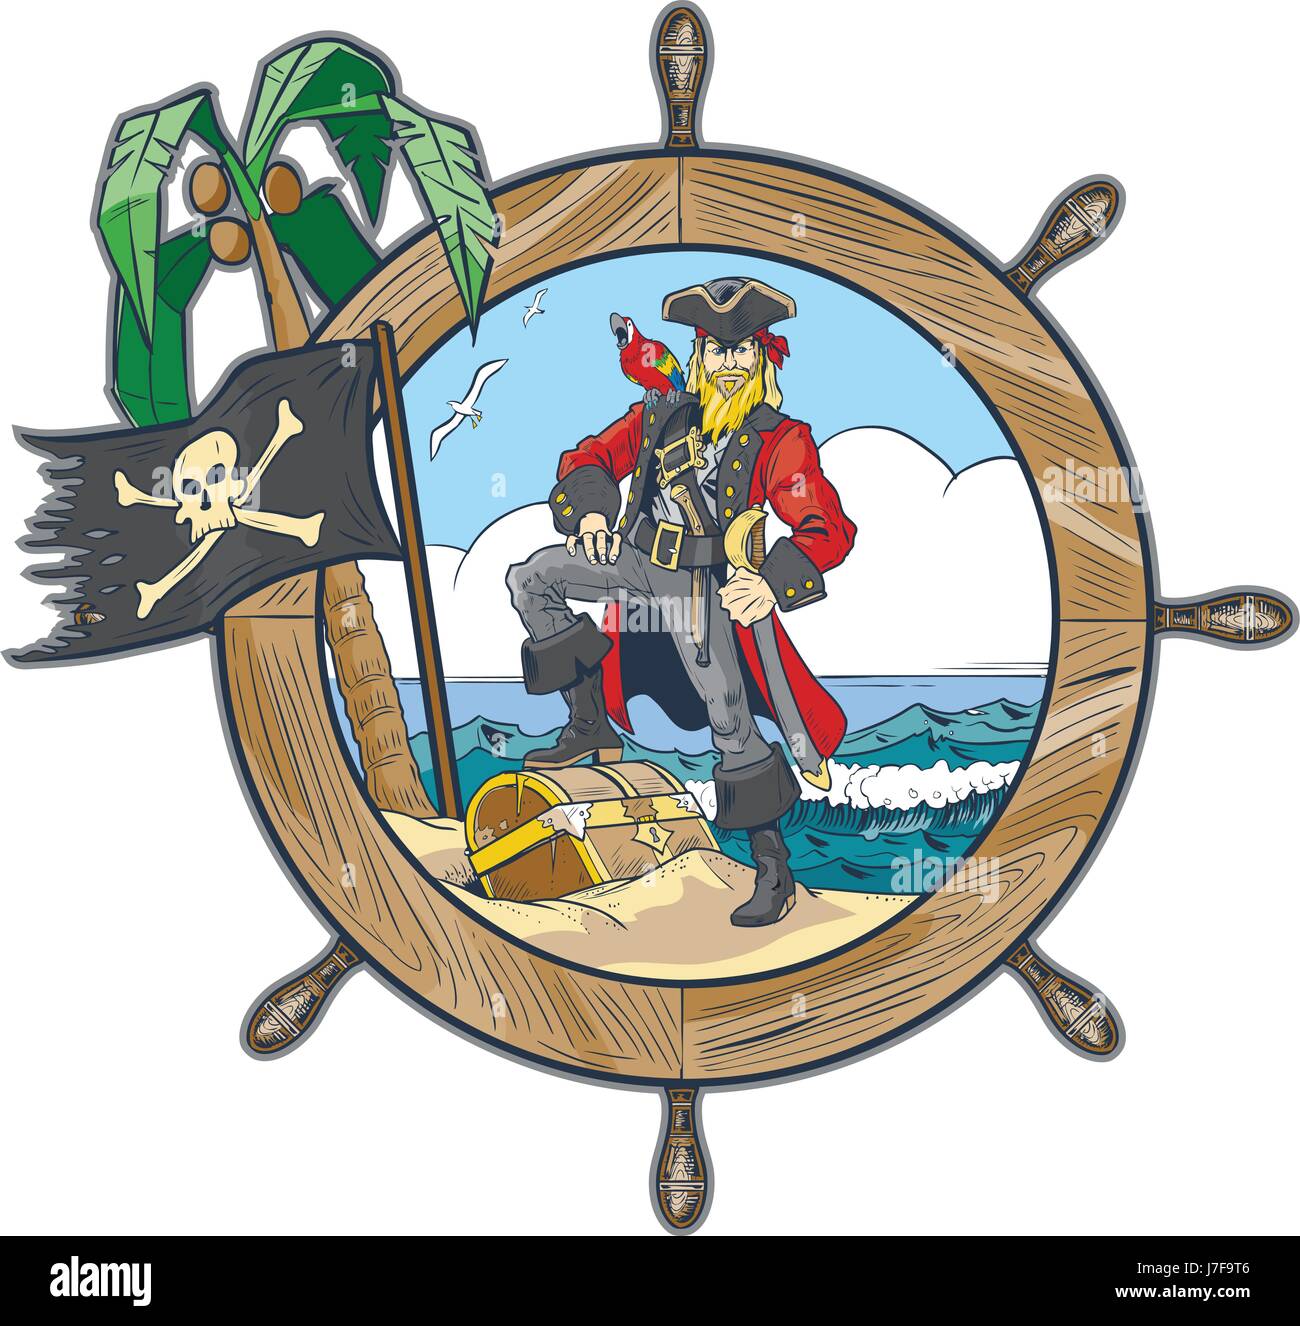 Vector cartoon clip art illustration of a pirate in a ship’s steering wheel design with a flag, palm tree, parrot, seagulls, and a treasure chest on t Stock Vector